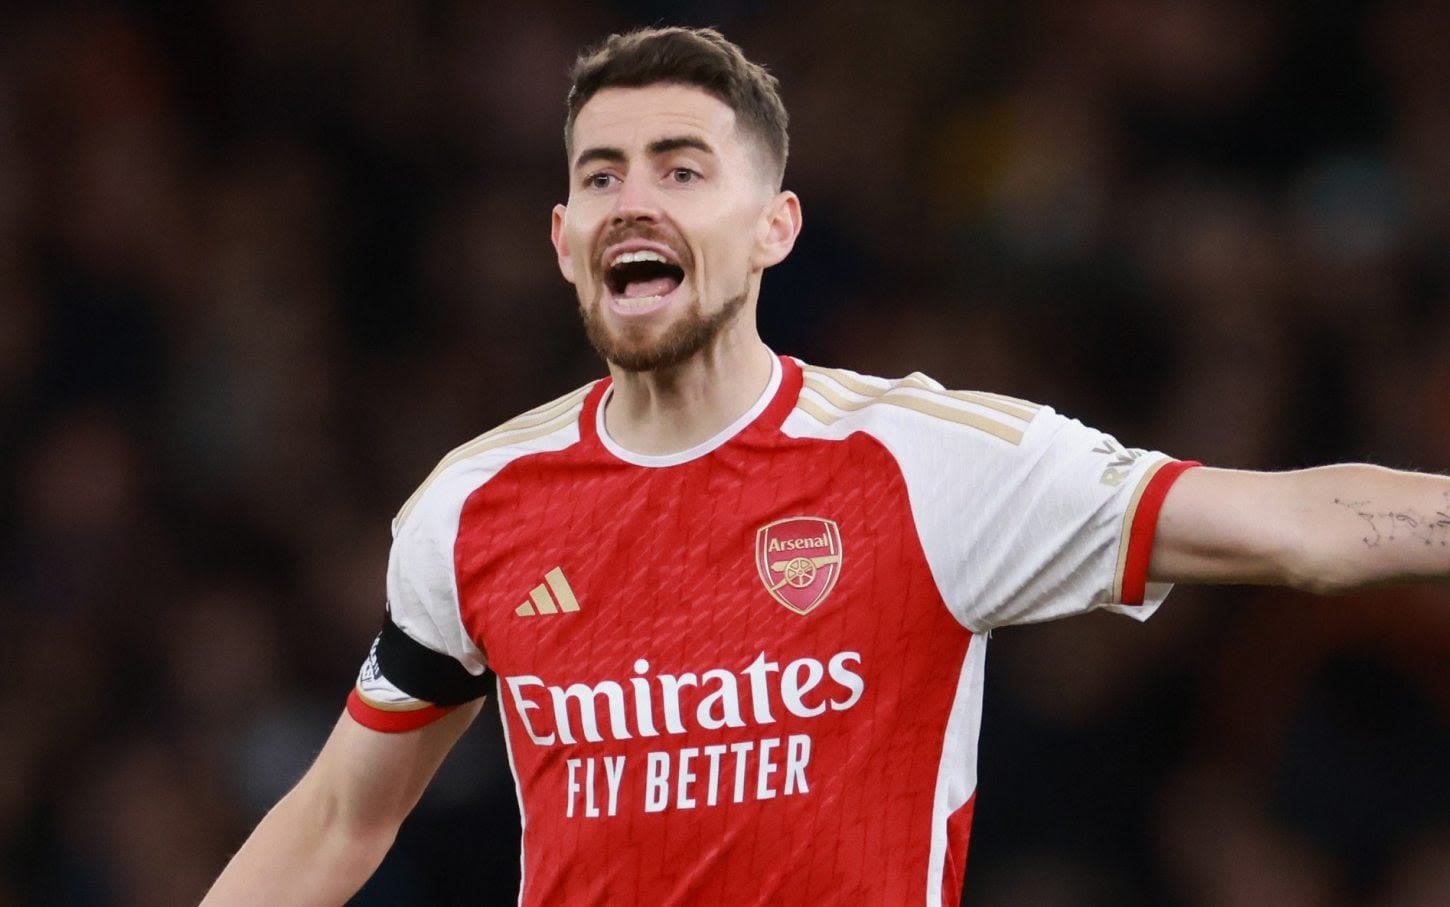 Jorginho is Mikel Arteta’s eyes and ears on the pitch – that is why Arsenal want to keep him